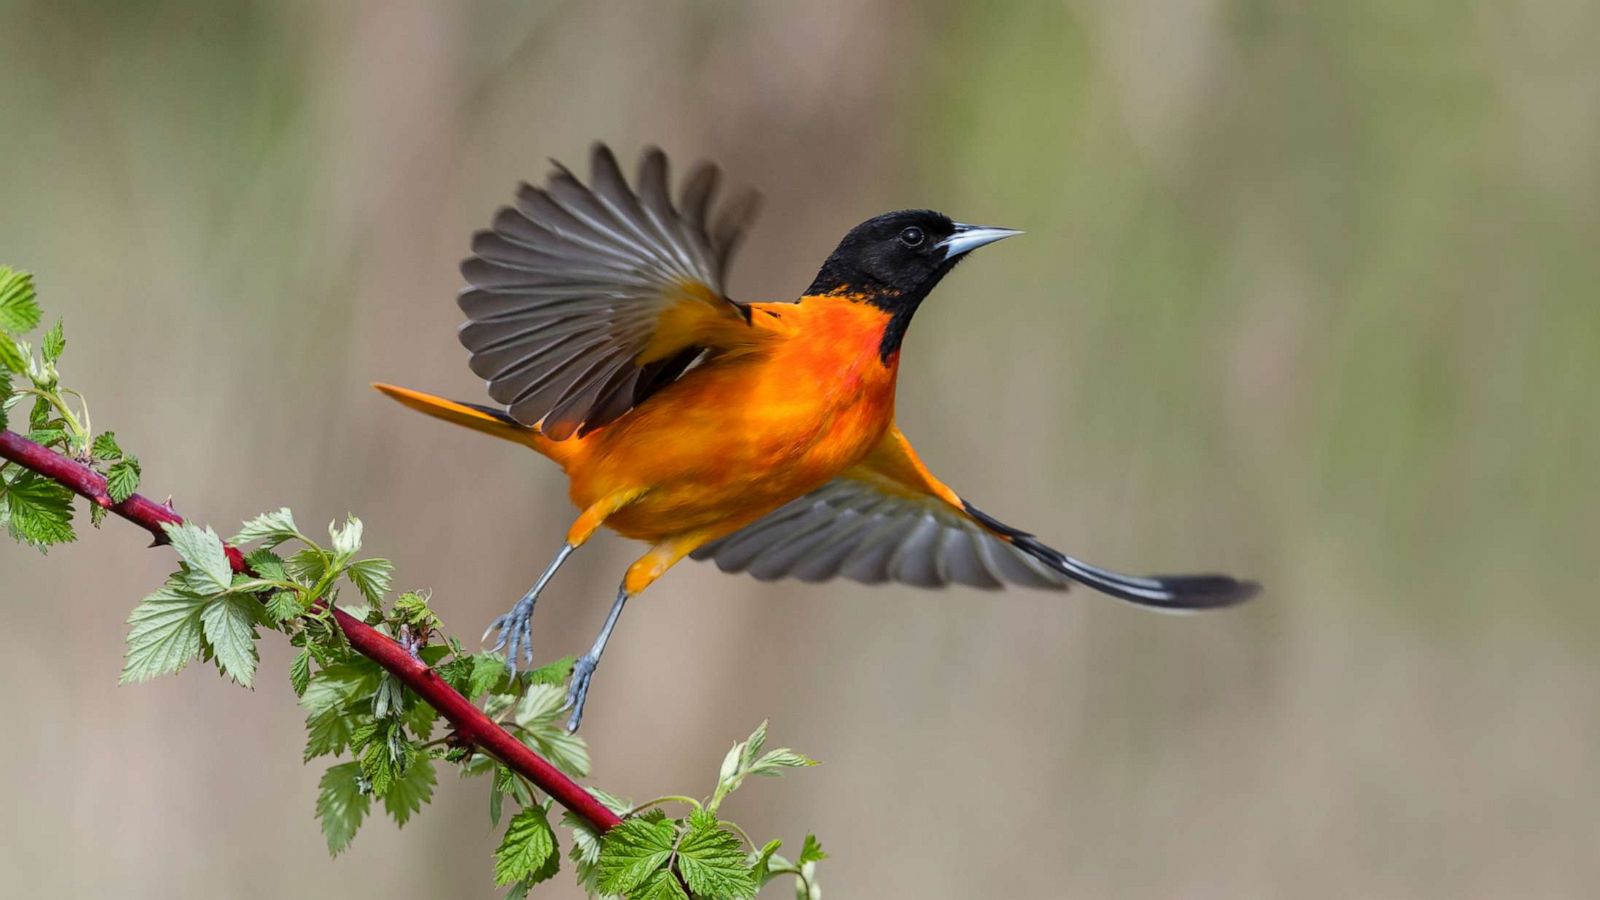 Two-thirds of birds in North America at risk of extinction due to climate  change: Report - ABC News